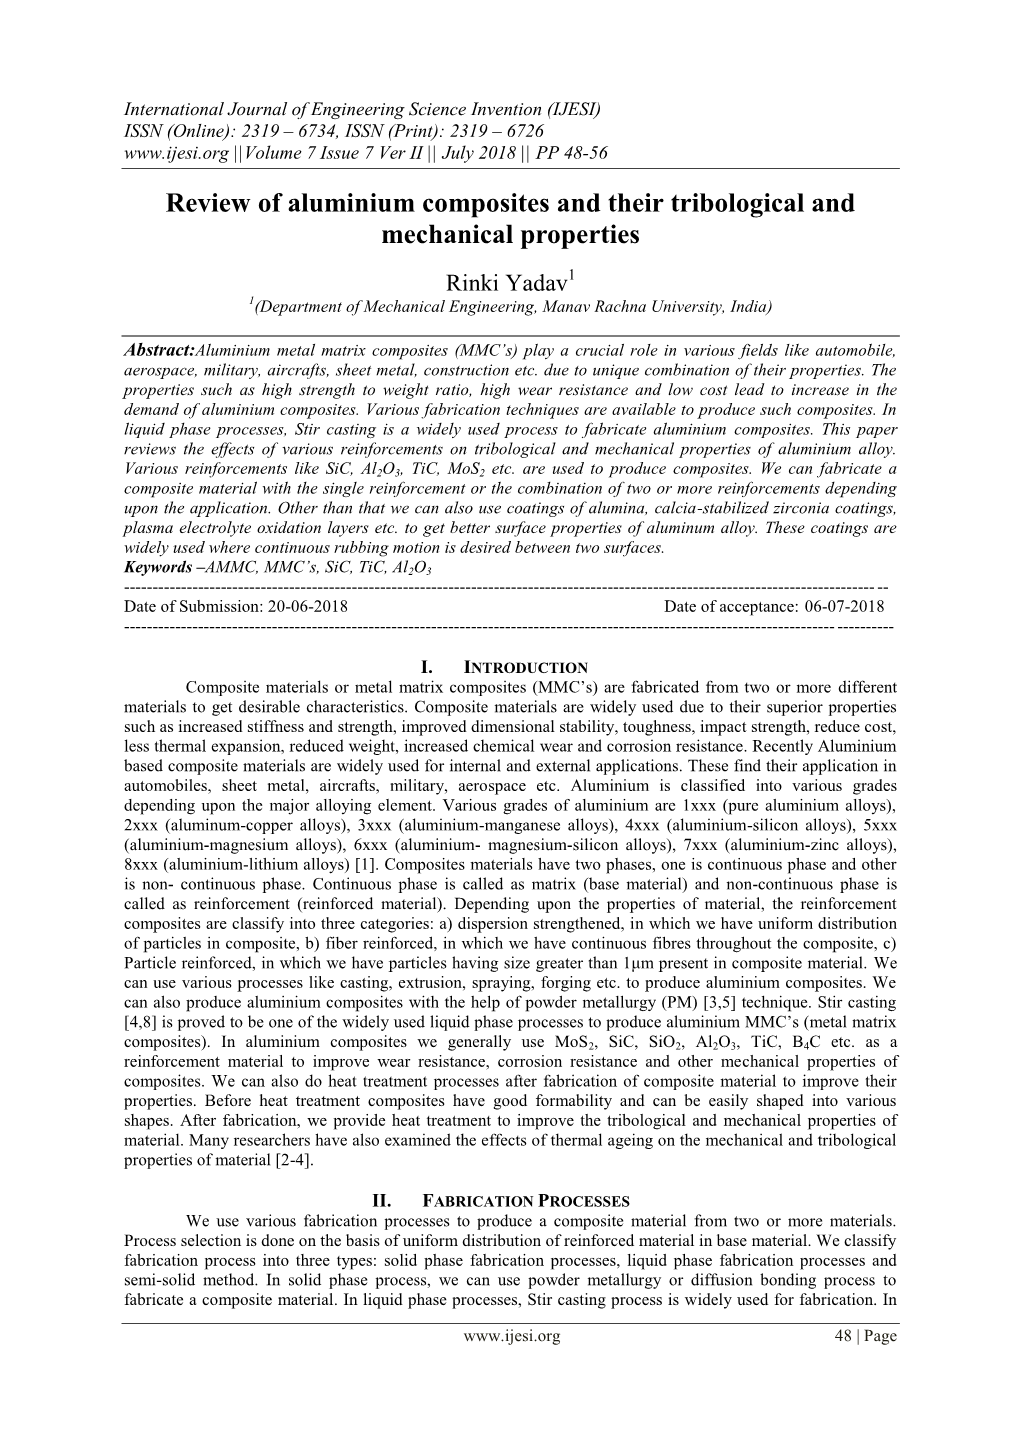 Review of Aluminium Composites and Their Tribological and Mechanical Properties